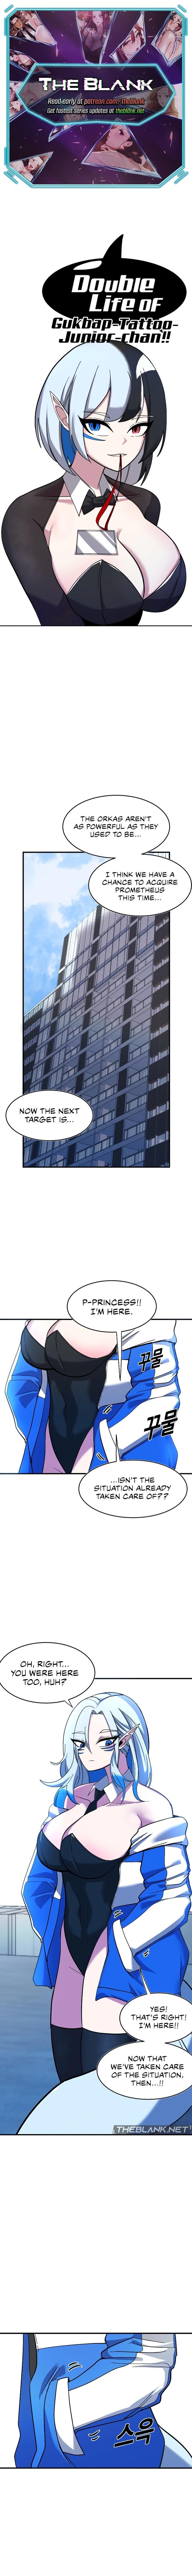 Double Life of Gukbap - Chapter 17 Page 1